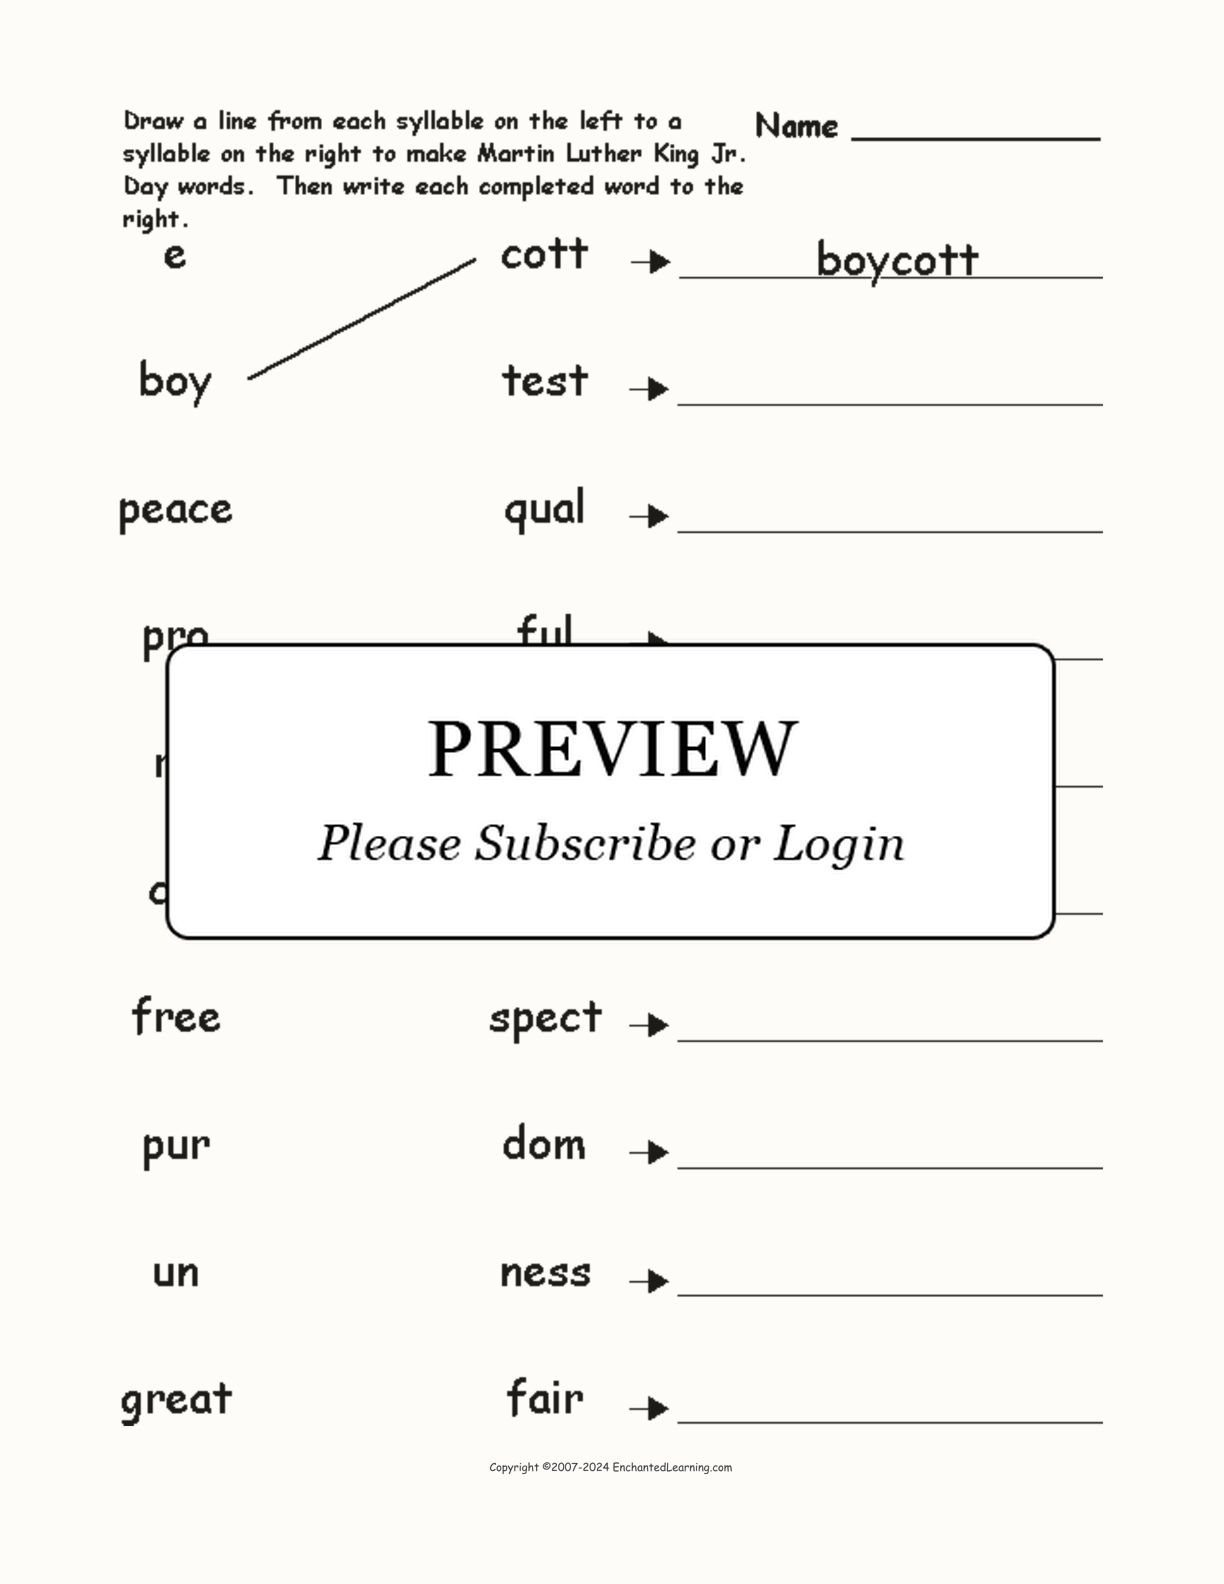 Match the Syllables: Martin Luther King, Jr. interactive worksheet page 1